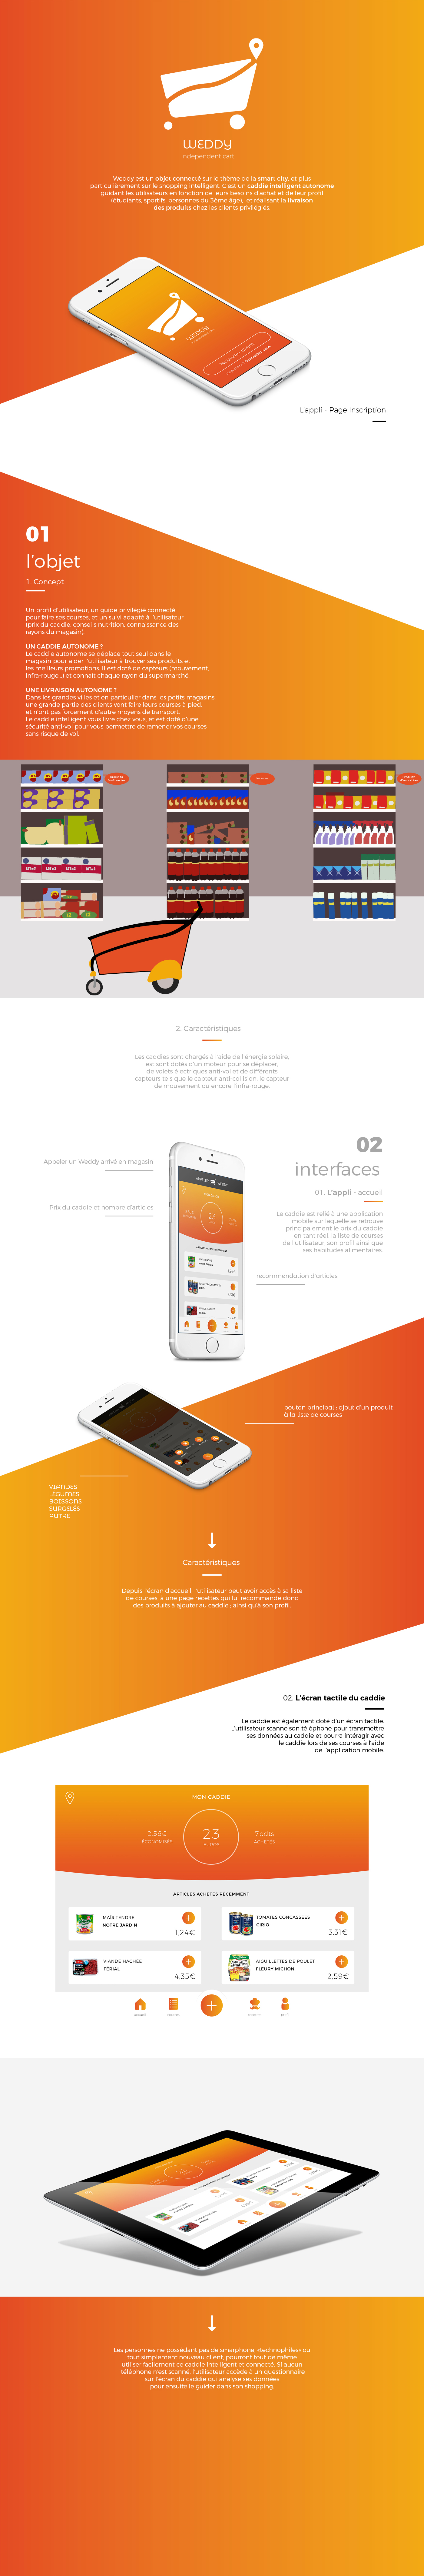 connectedobject interaction mobileapp mobile design artisticdirection graphics GraphicArts interactivedesign SmartCity